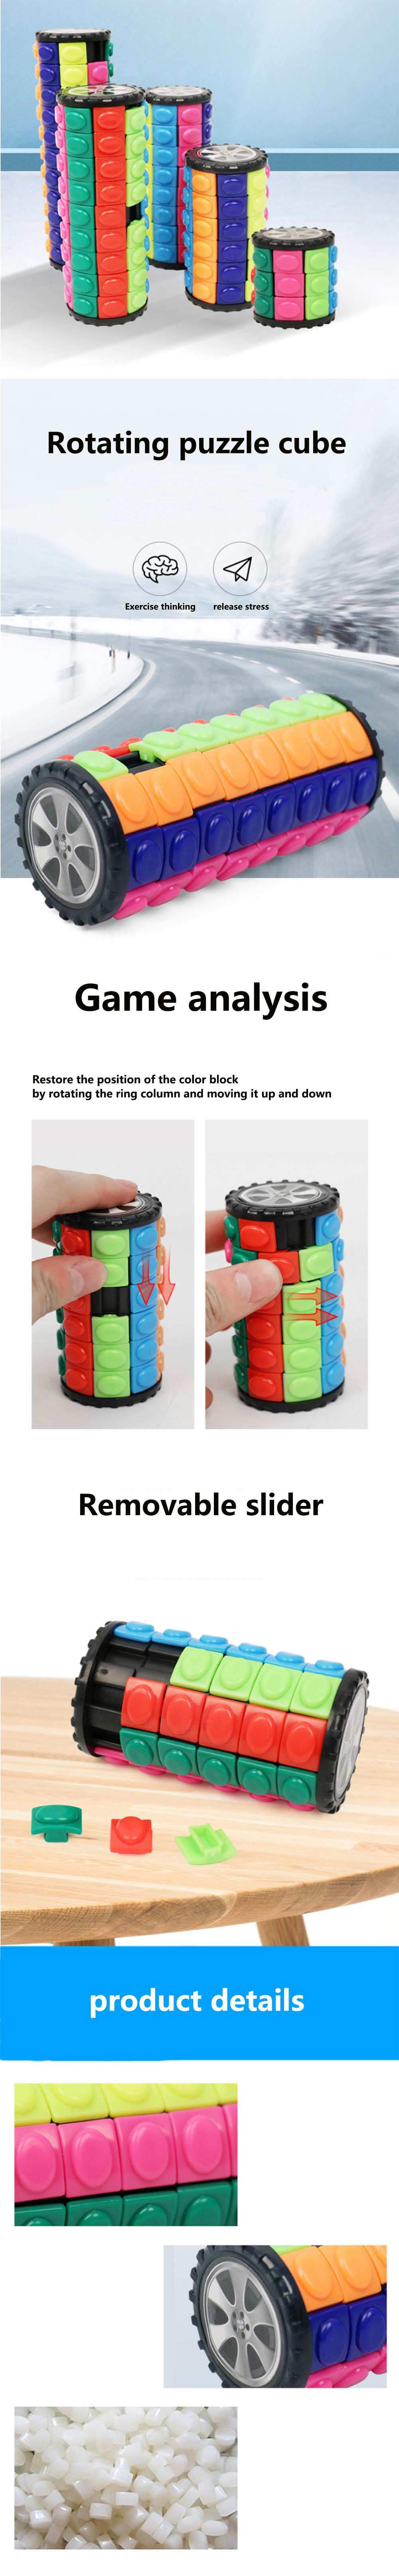 357-Layers-Fidget-Toy-Magic-Cube-Puzzle-Brain-Teasers-for-Adults-Cylinder-Rotate-Hand-Game-Trick-Puz-1924760-2